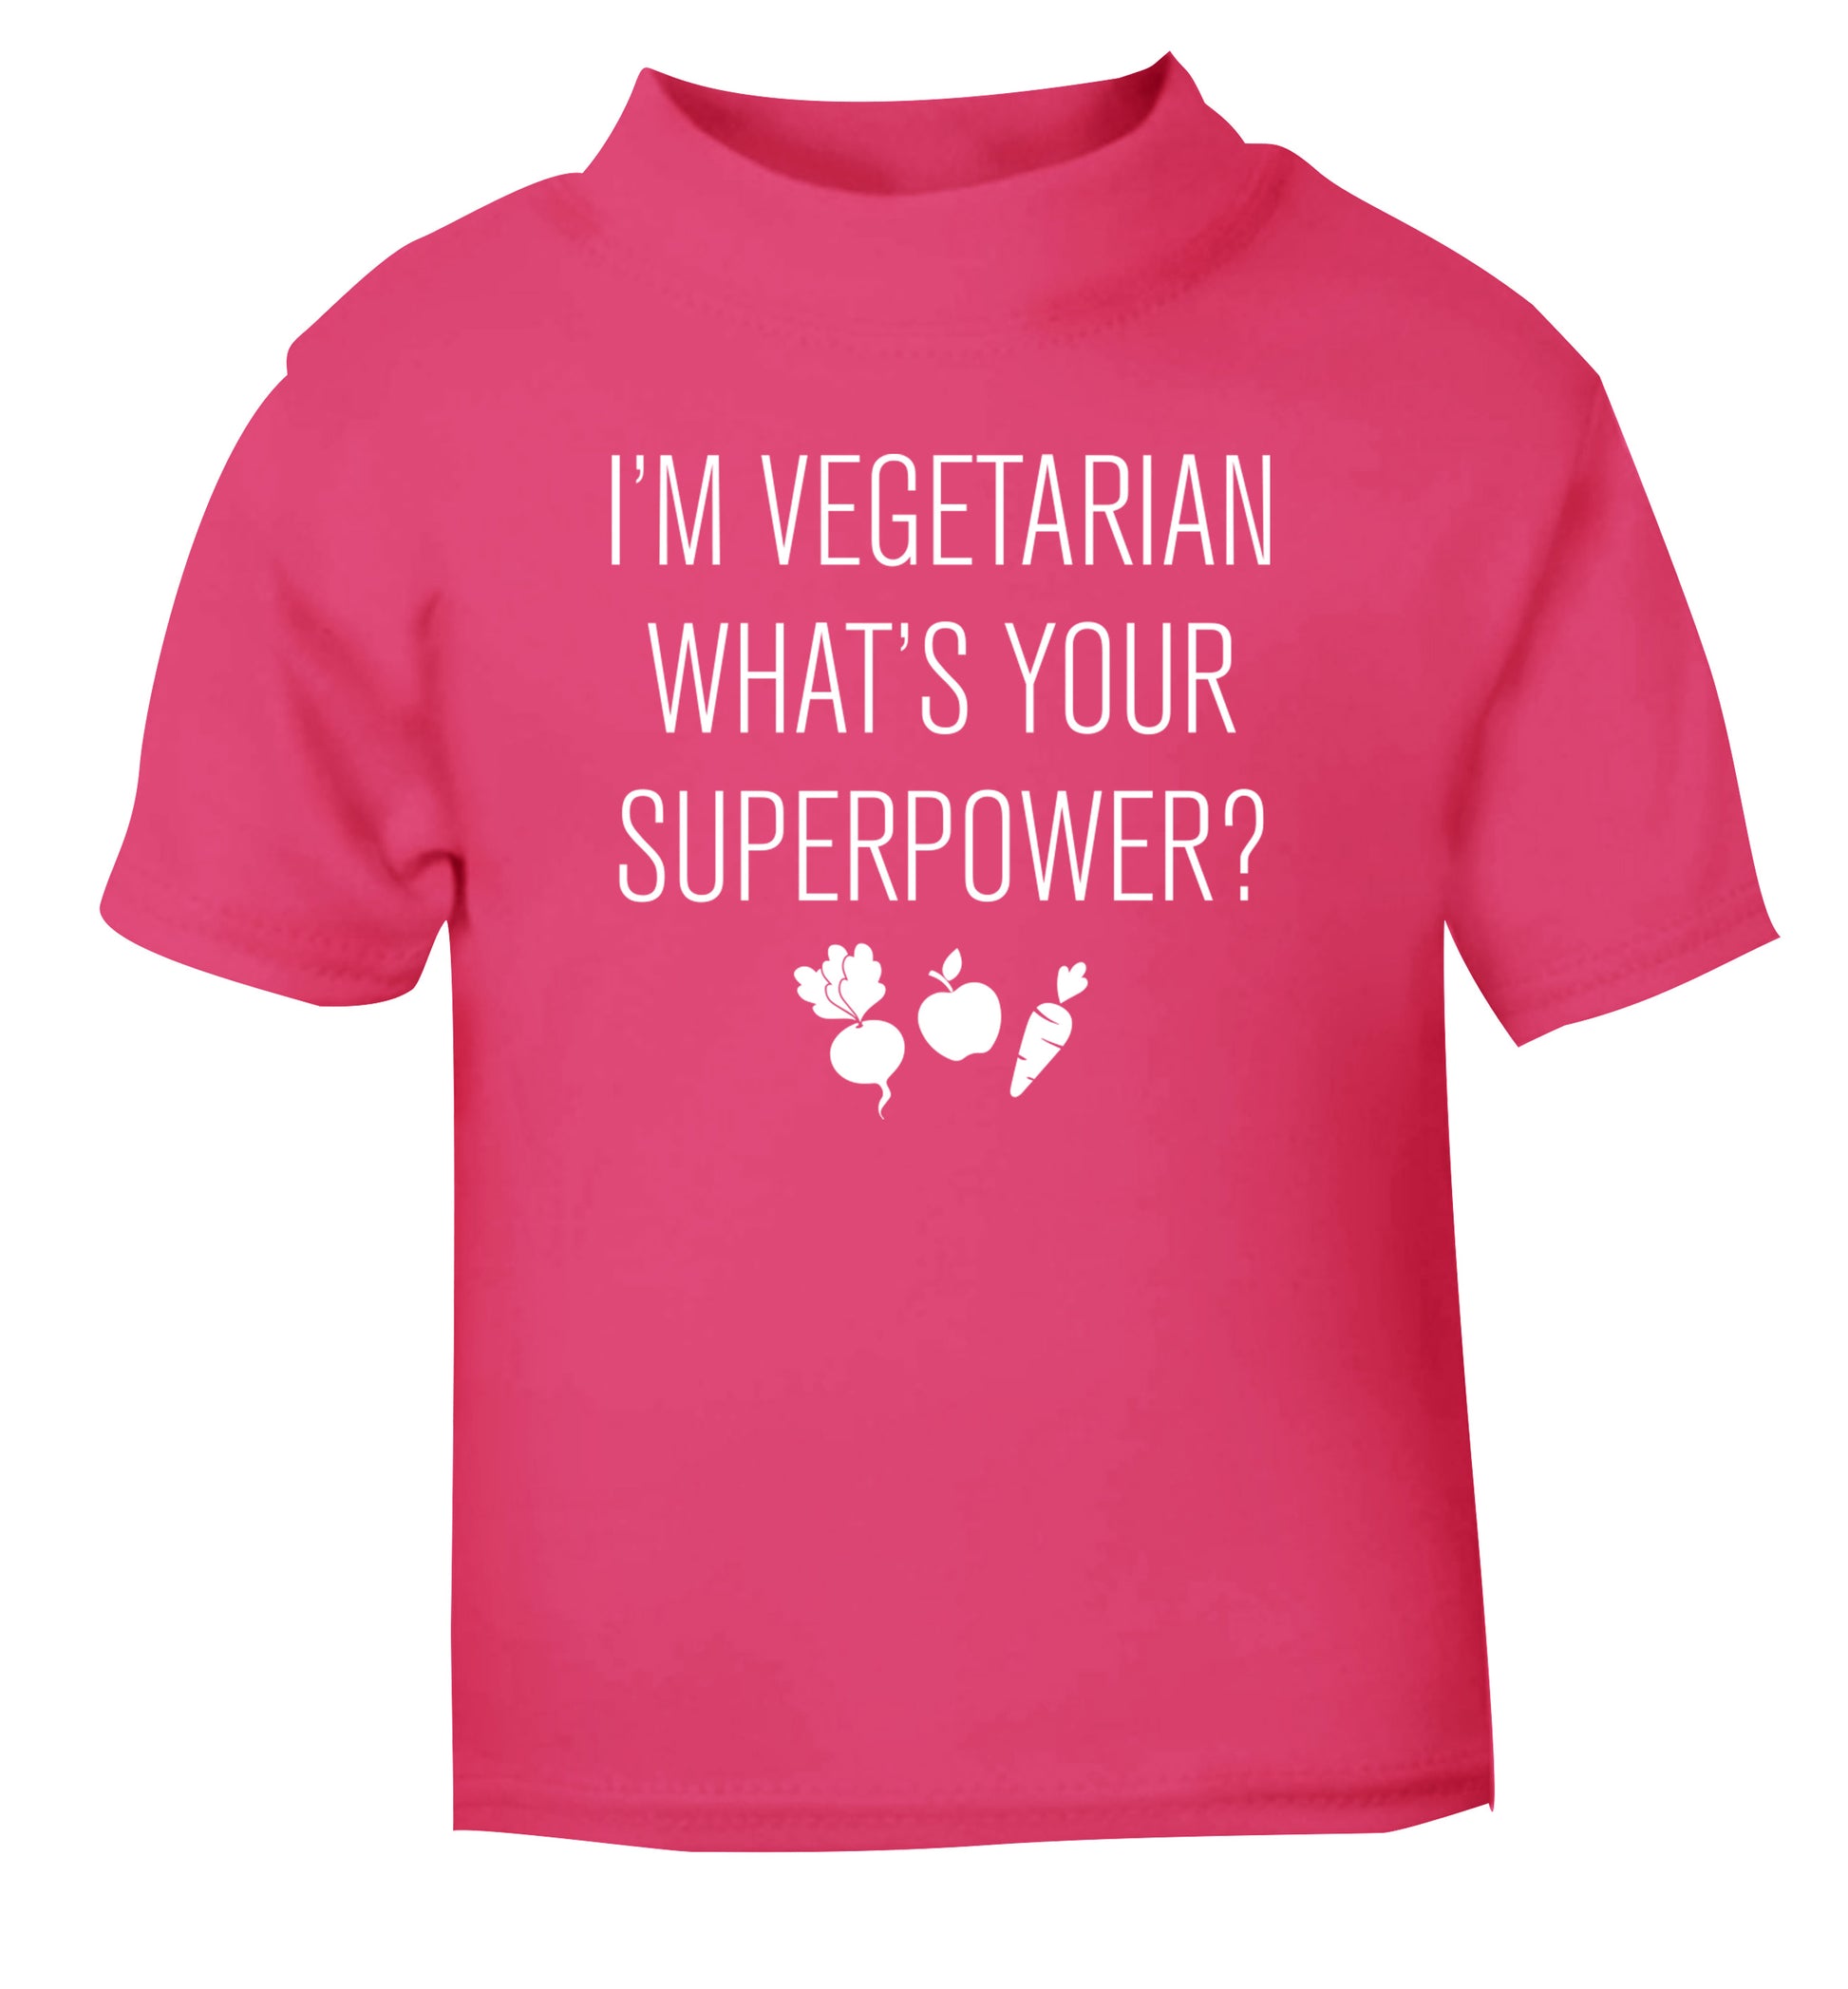 I'm vegetarian what's your superpower? pink Baby Toddler Tshirt 2 Years